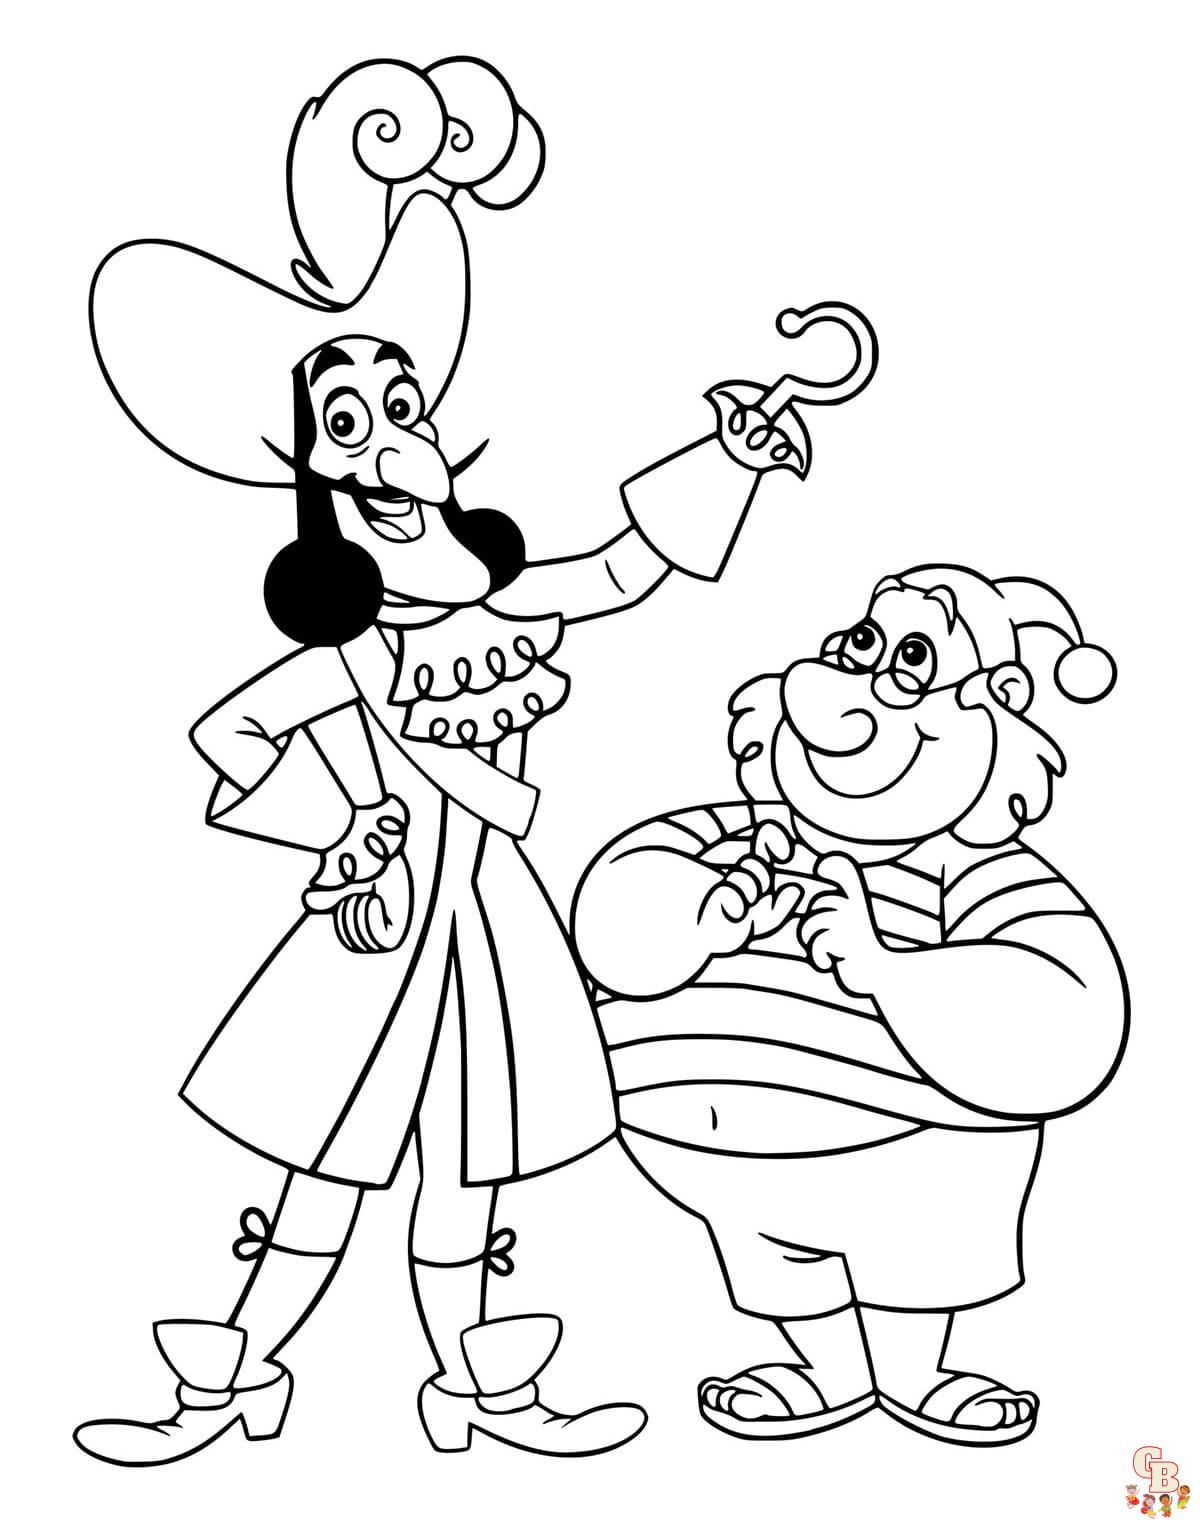 Free Captain Hook coloring pages for kids